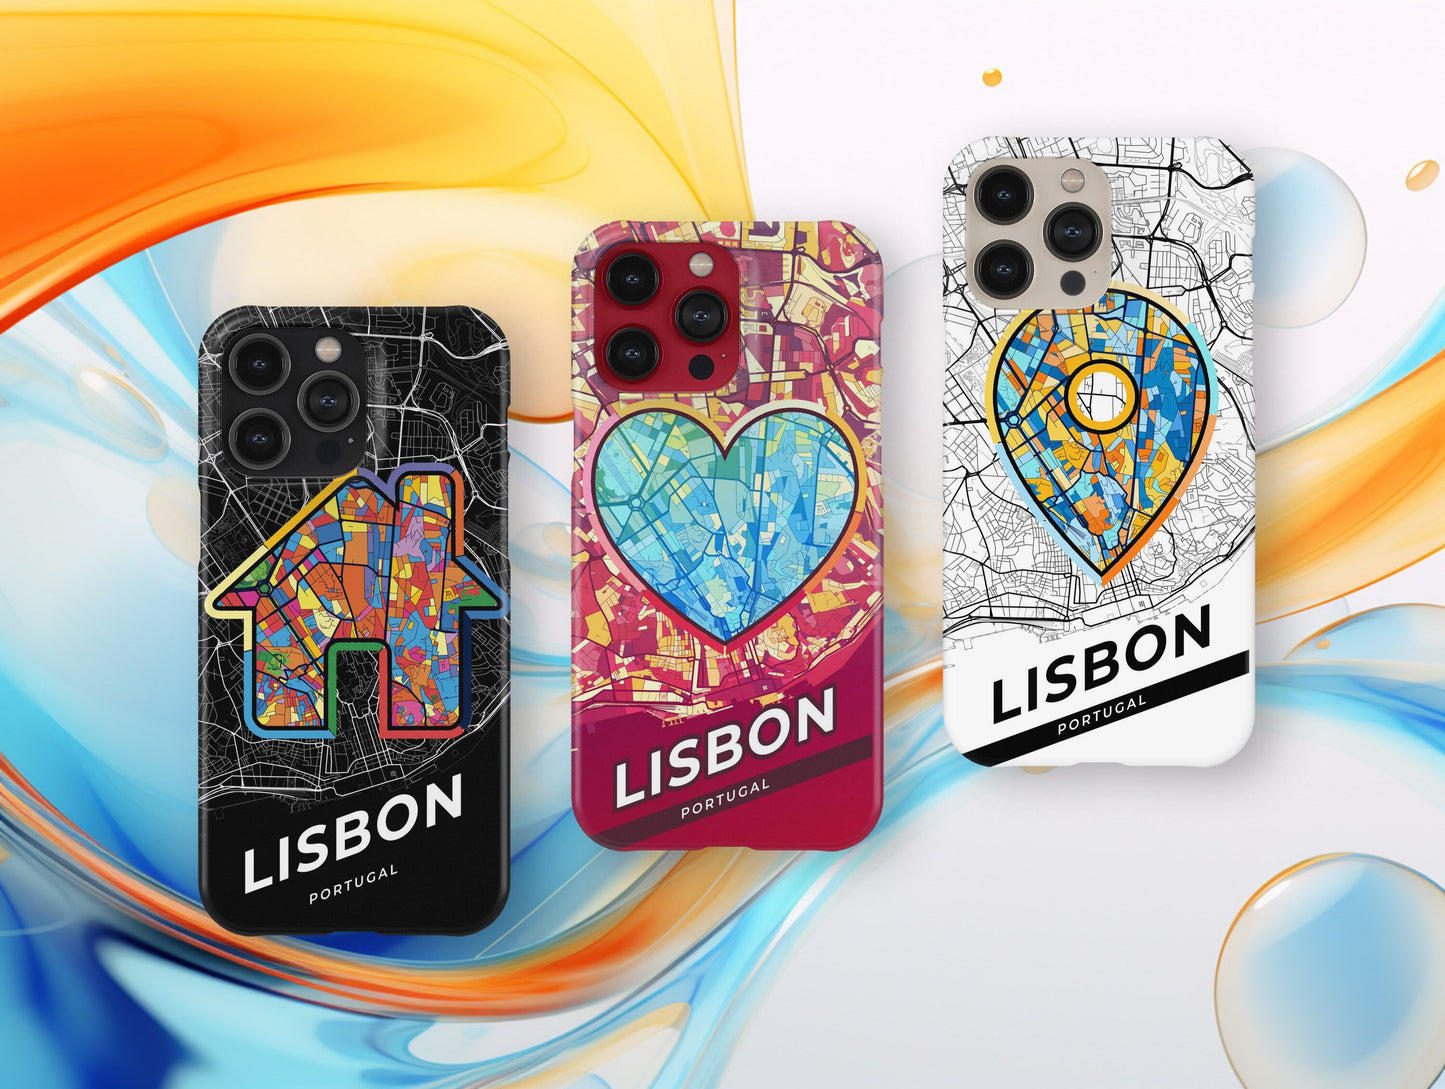 Lisbon Portugal slim phone case with colorful icon. Birthday, wedding or housewarming gift. Couple match cases.